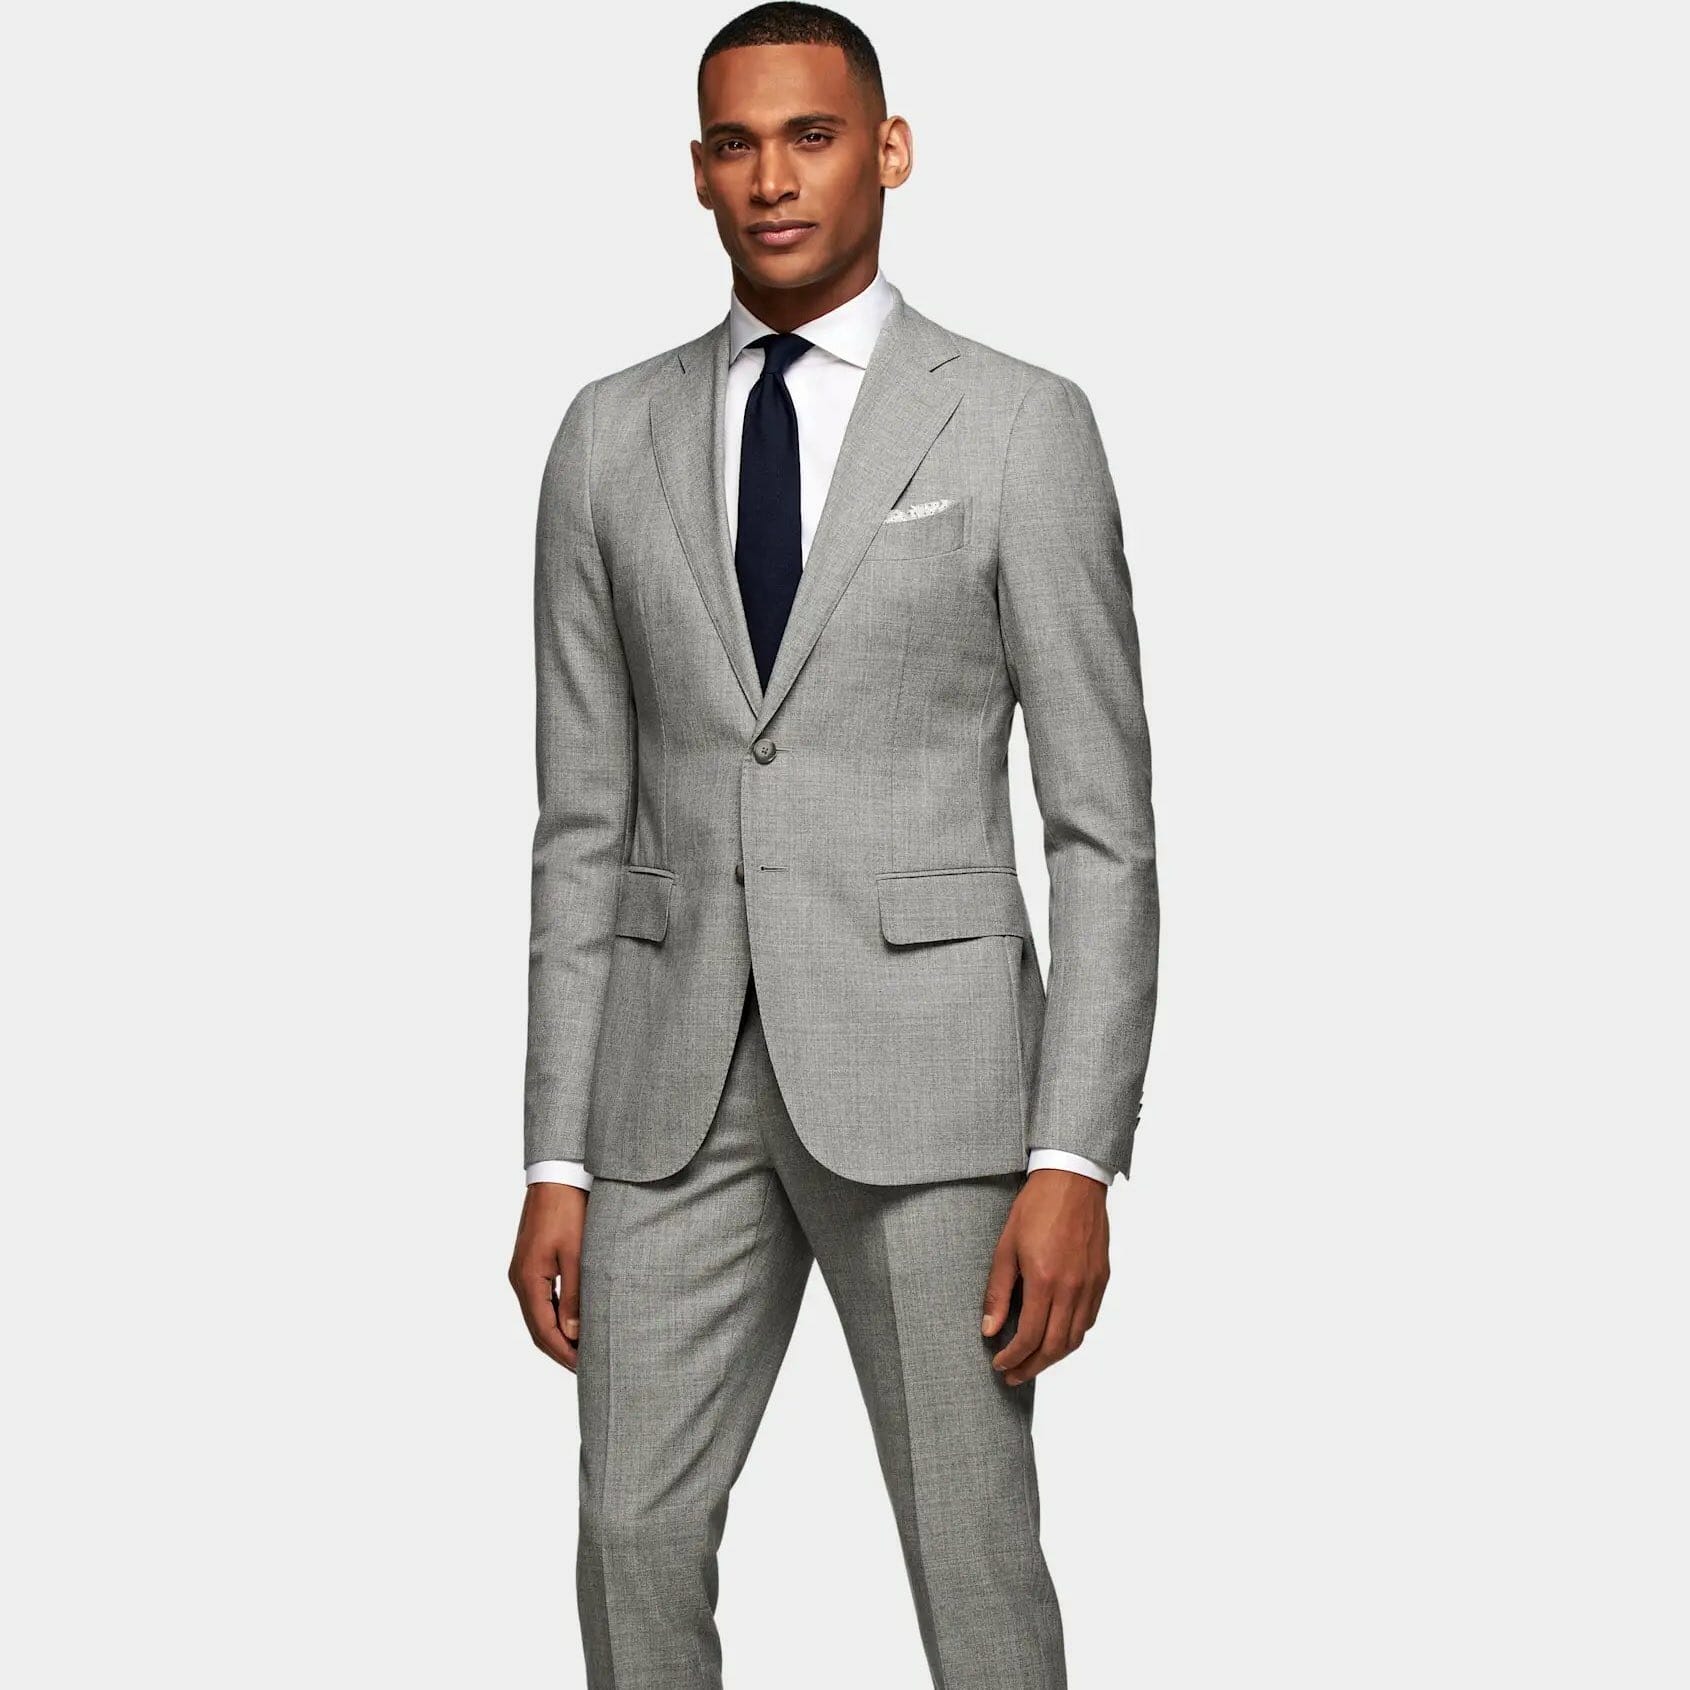 Rustic Light Gray Light Grey Suit Wedding With Peaked Lapel Perfect For  Groom Wear And Parties From Sexybride, $76.43 | DHgate.Com